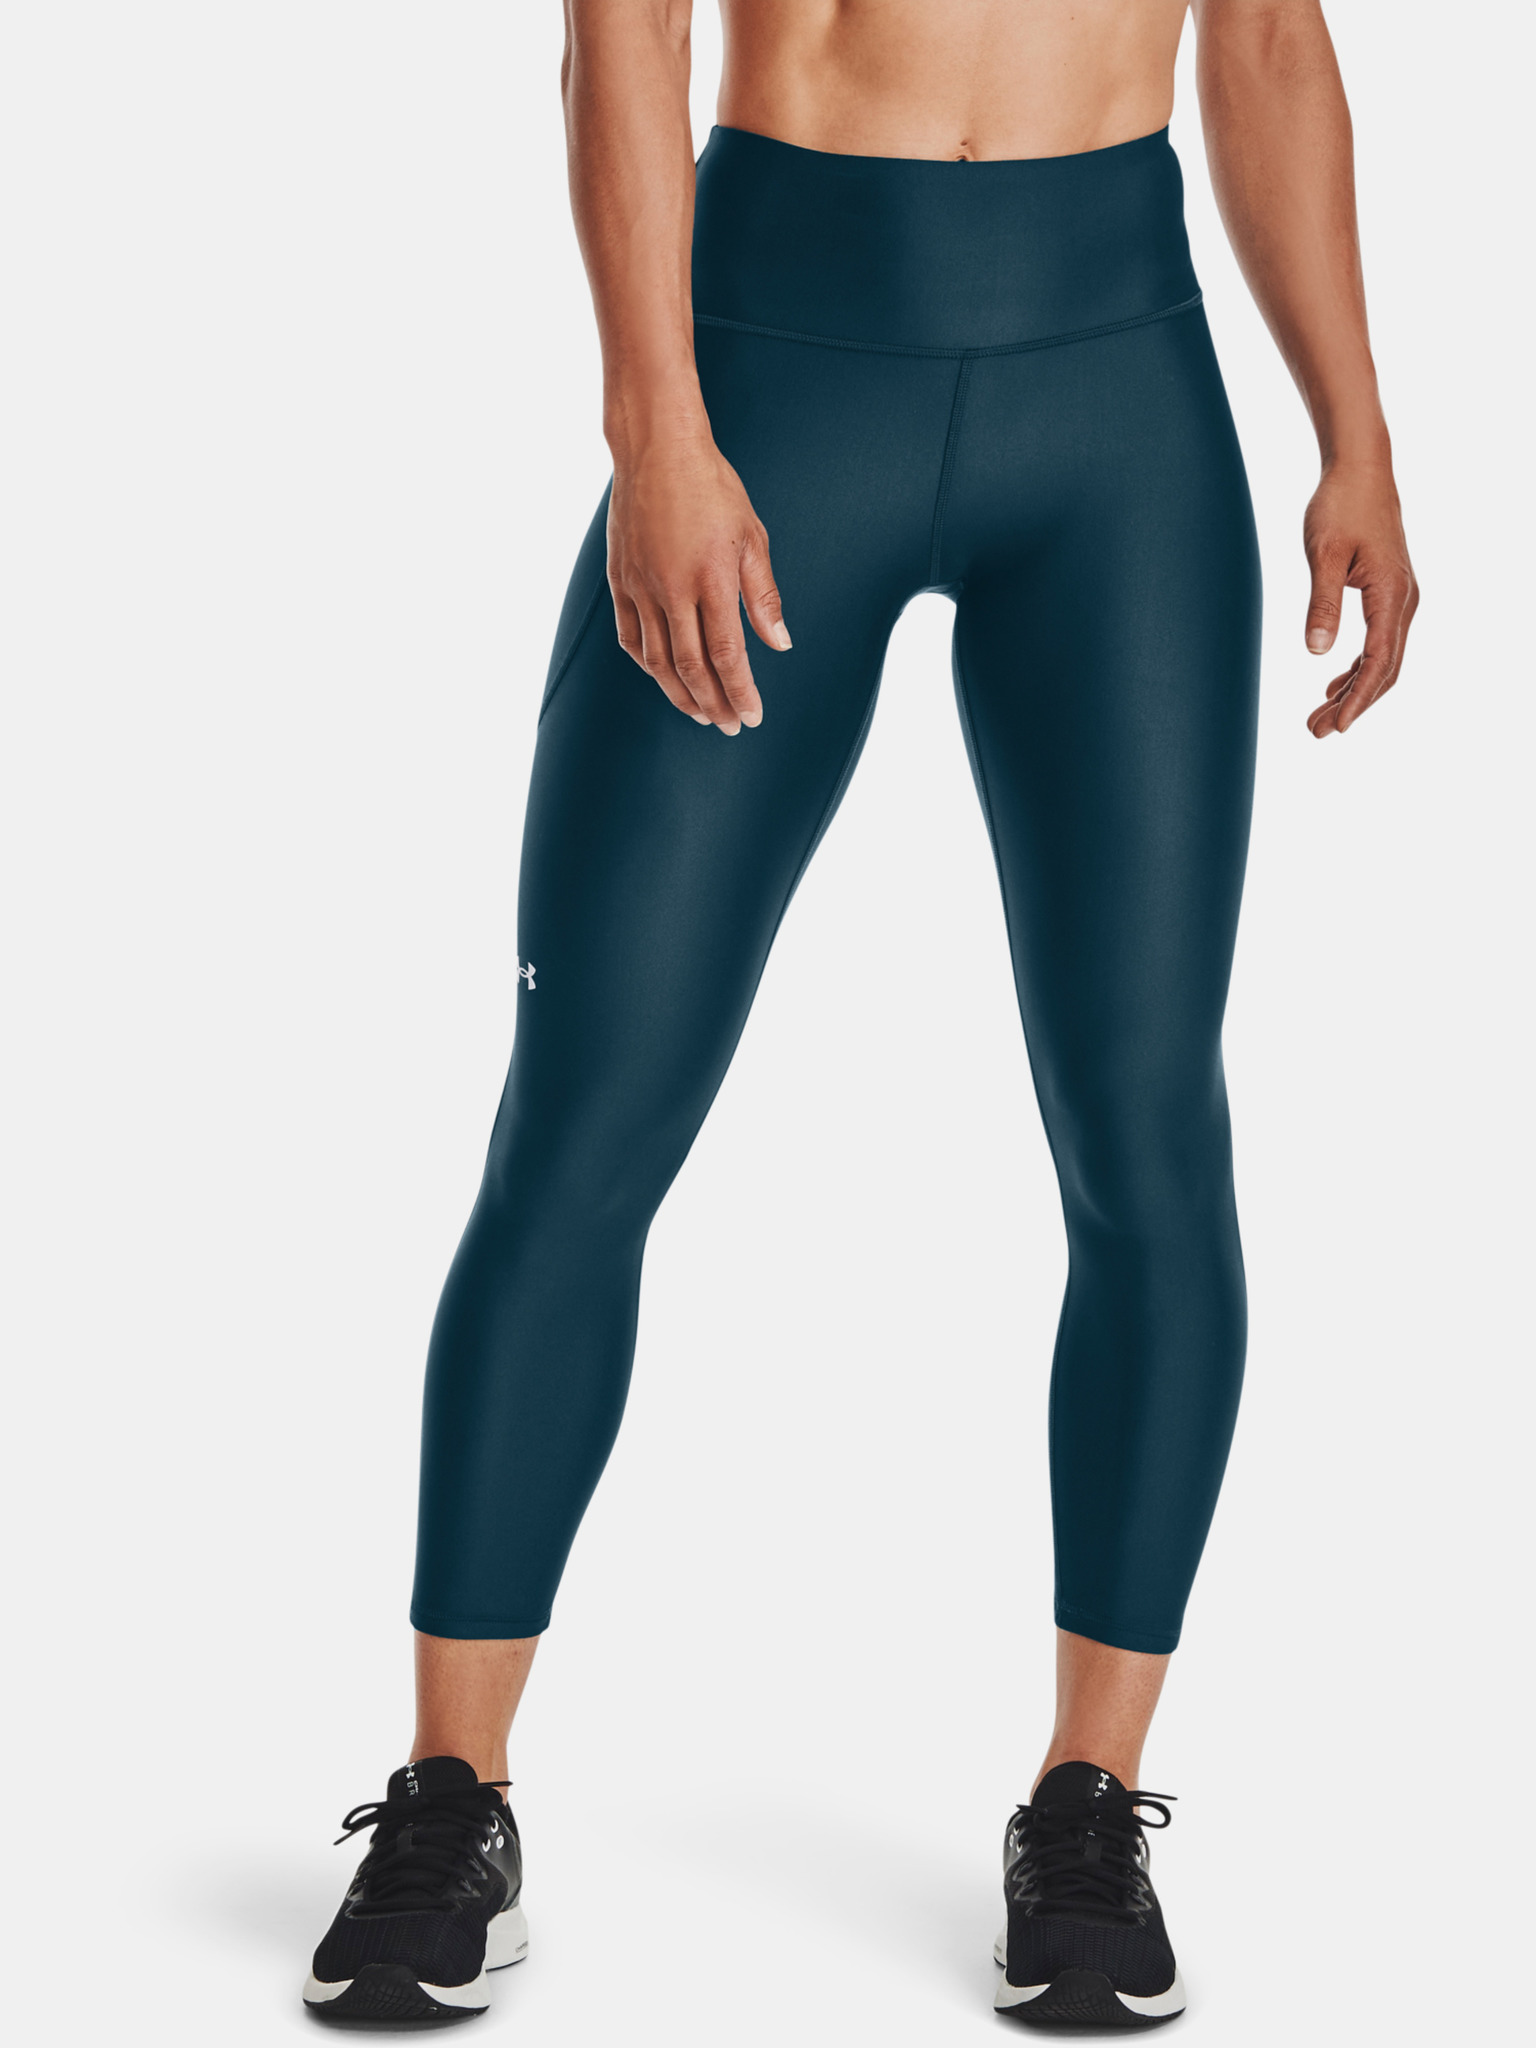 Under Armour Meridian Ultra High Rise Ankle Legging - Women's 